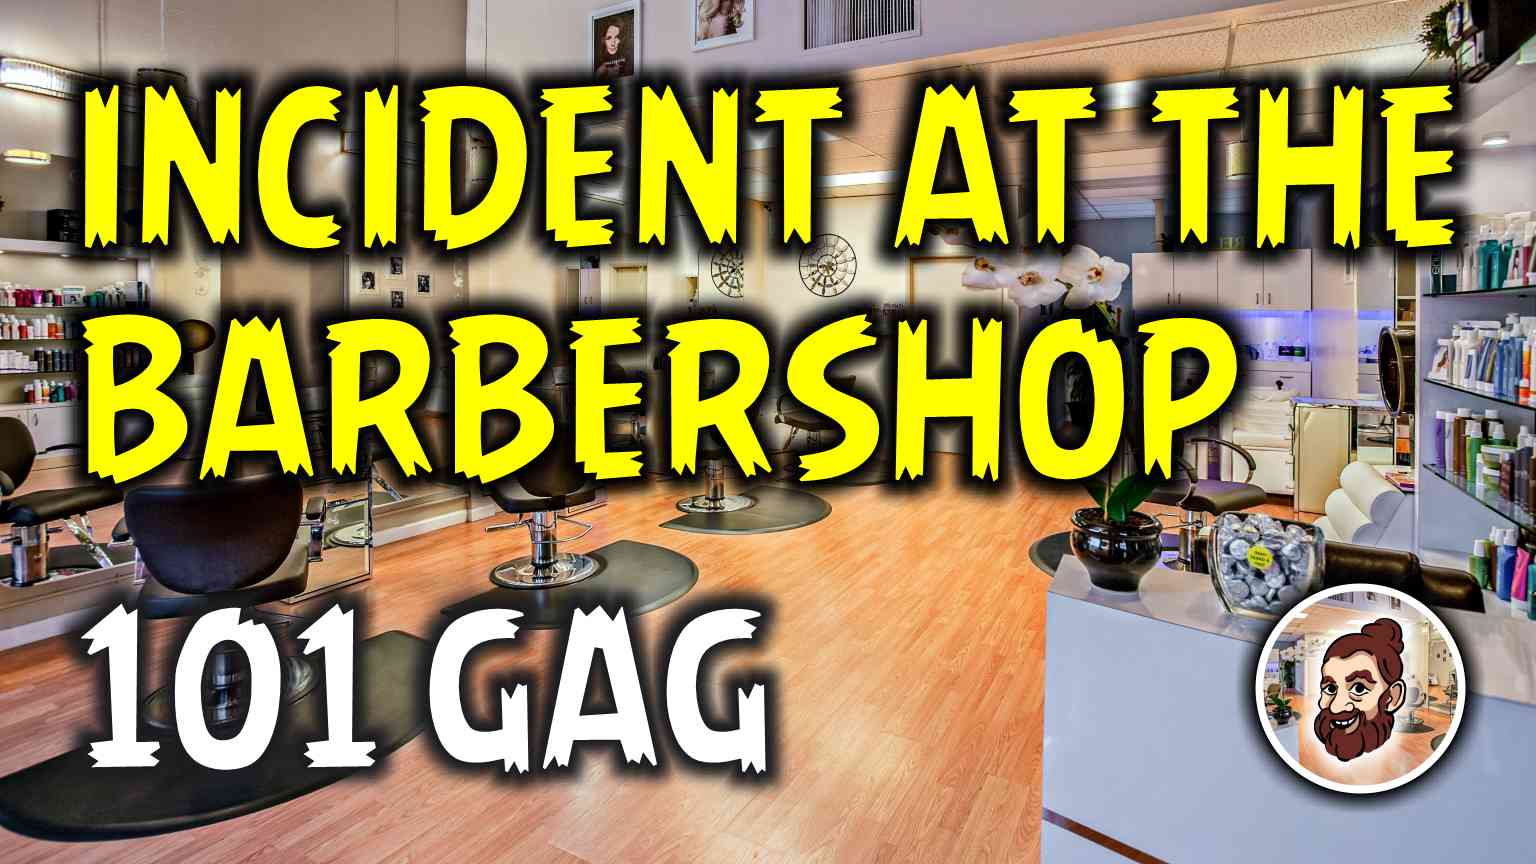 Incident at the barbershop